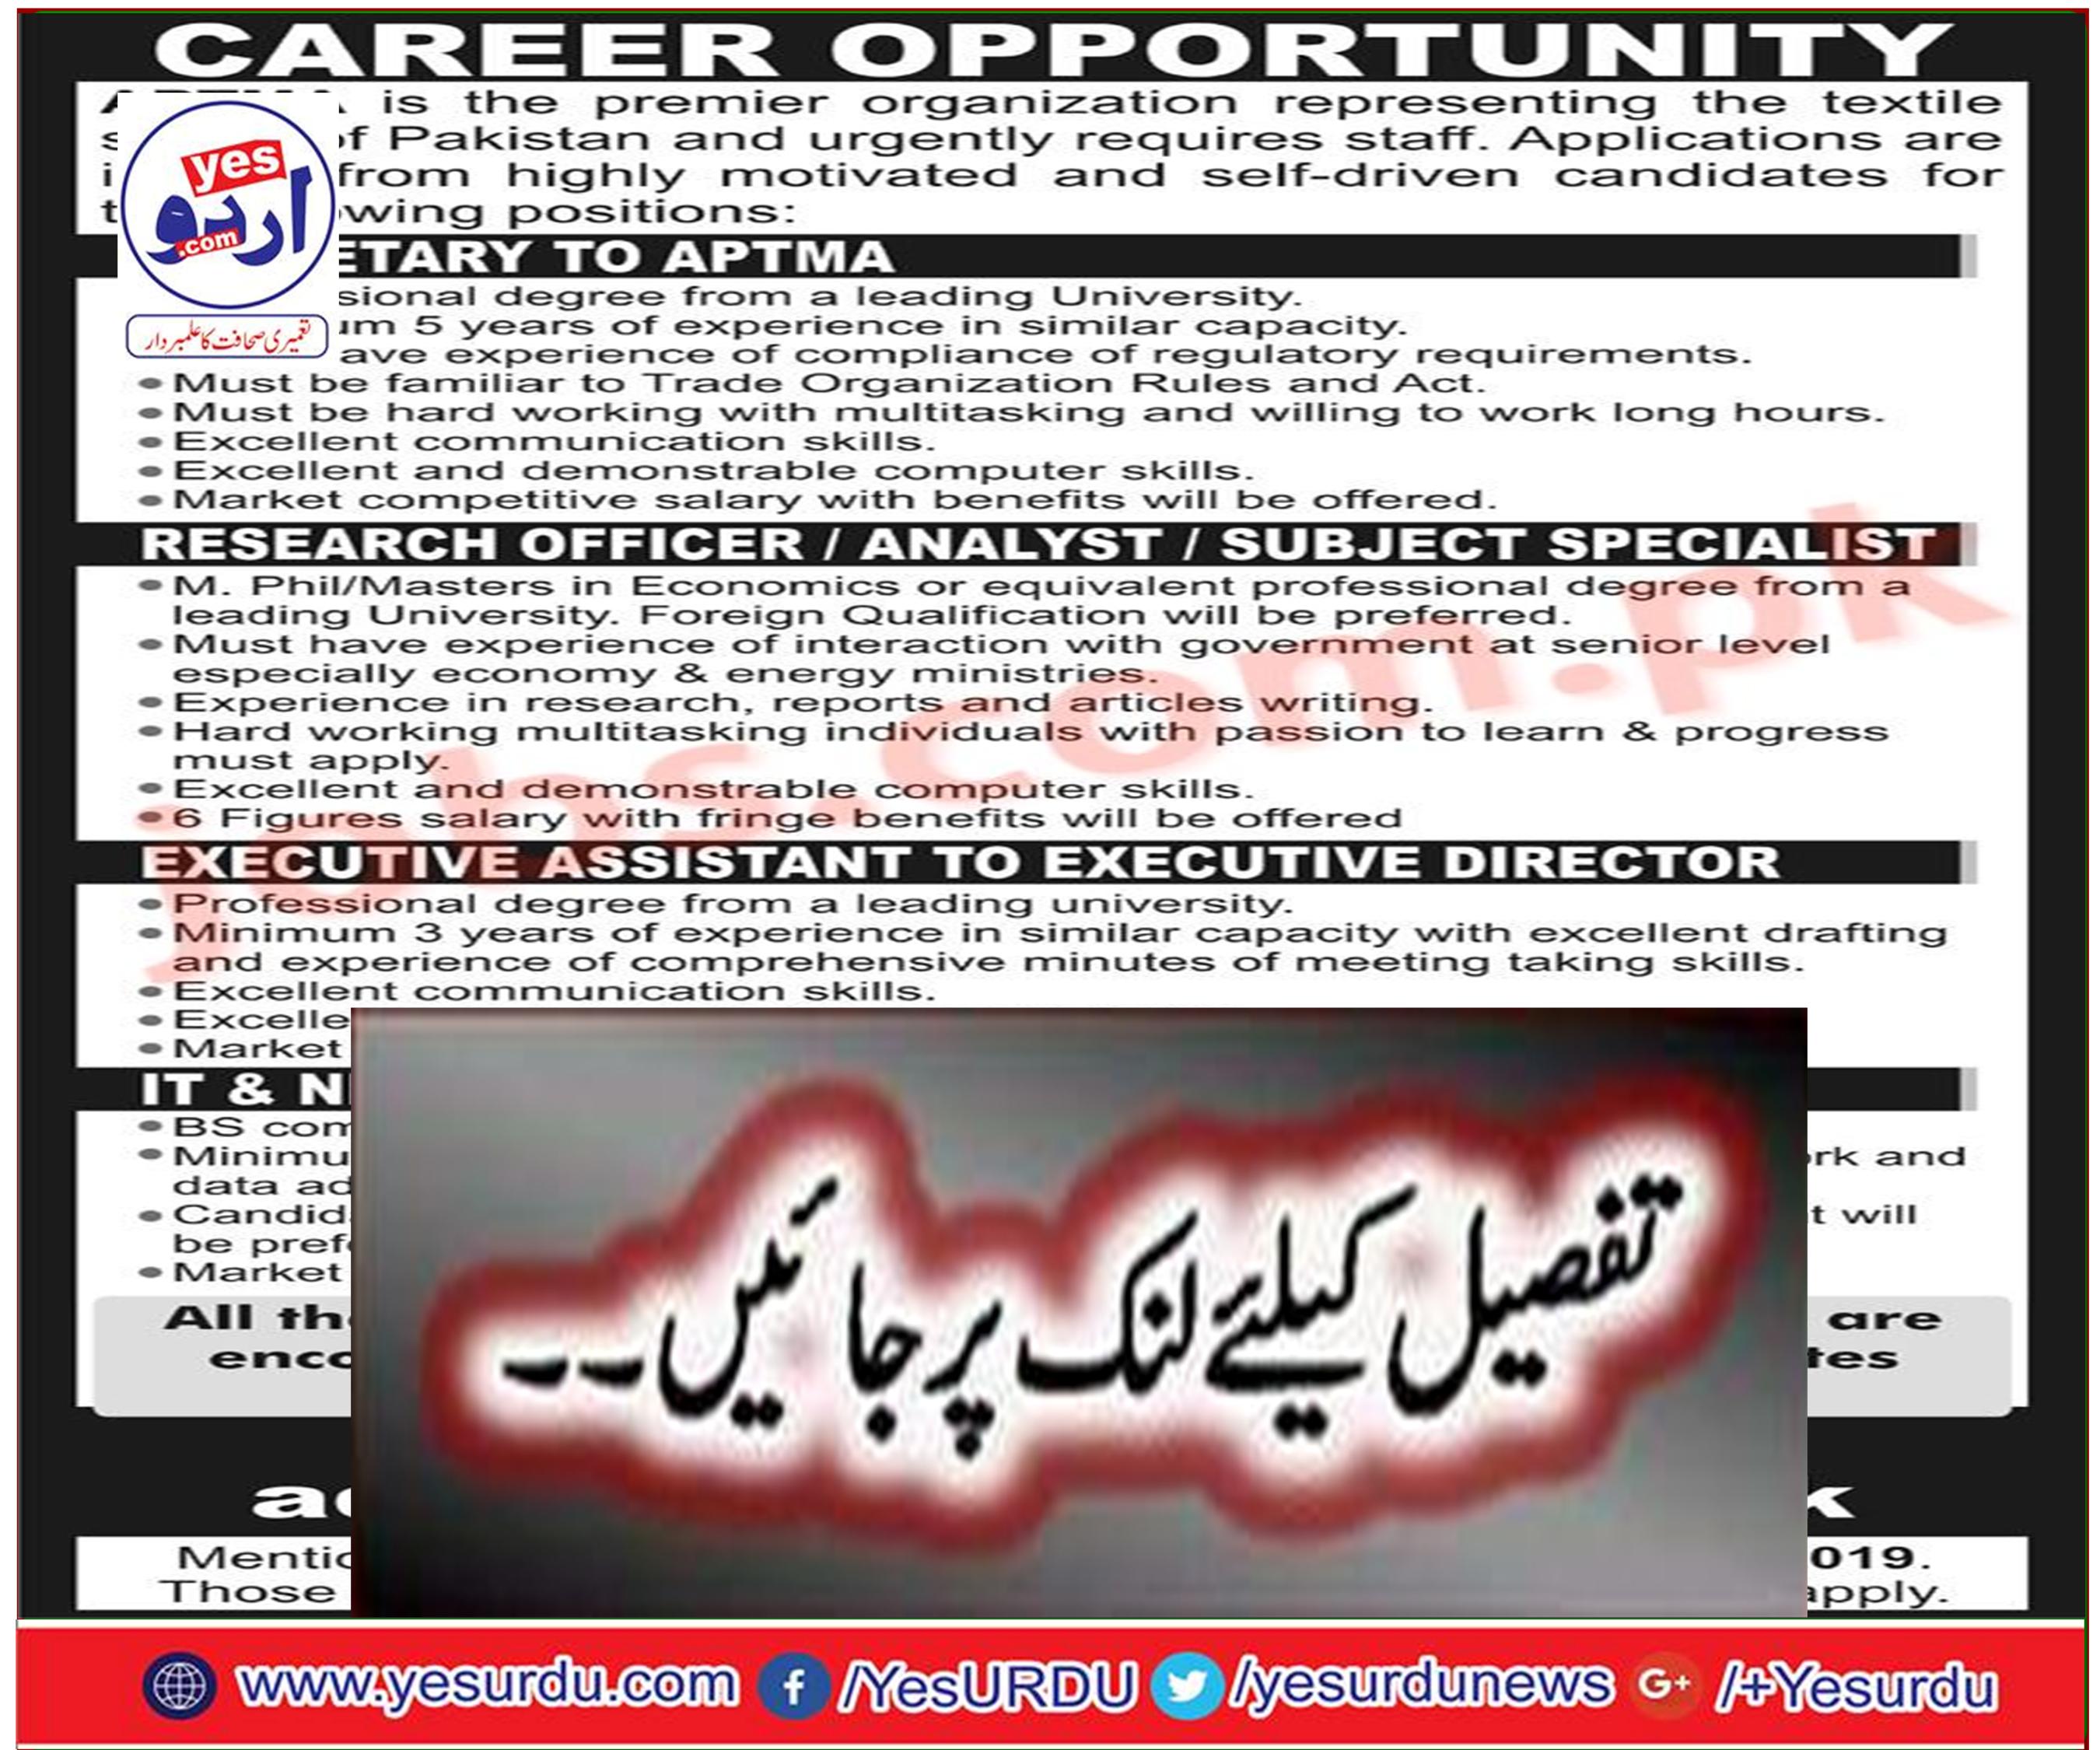 Optima Islamabad Jobs - Four Adams, Yate Staff, Research / Analyst / Subject Specialists